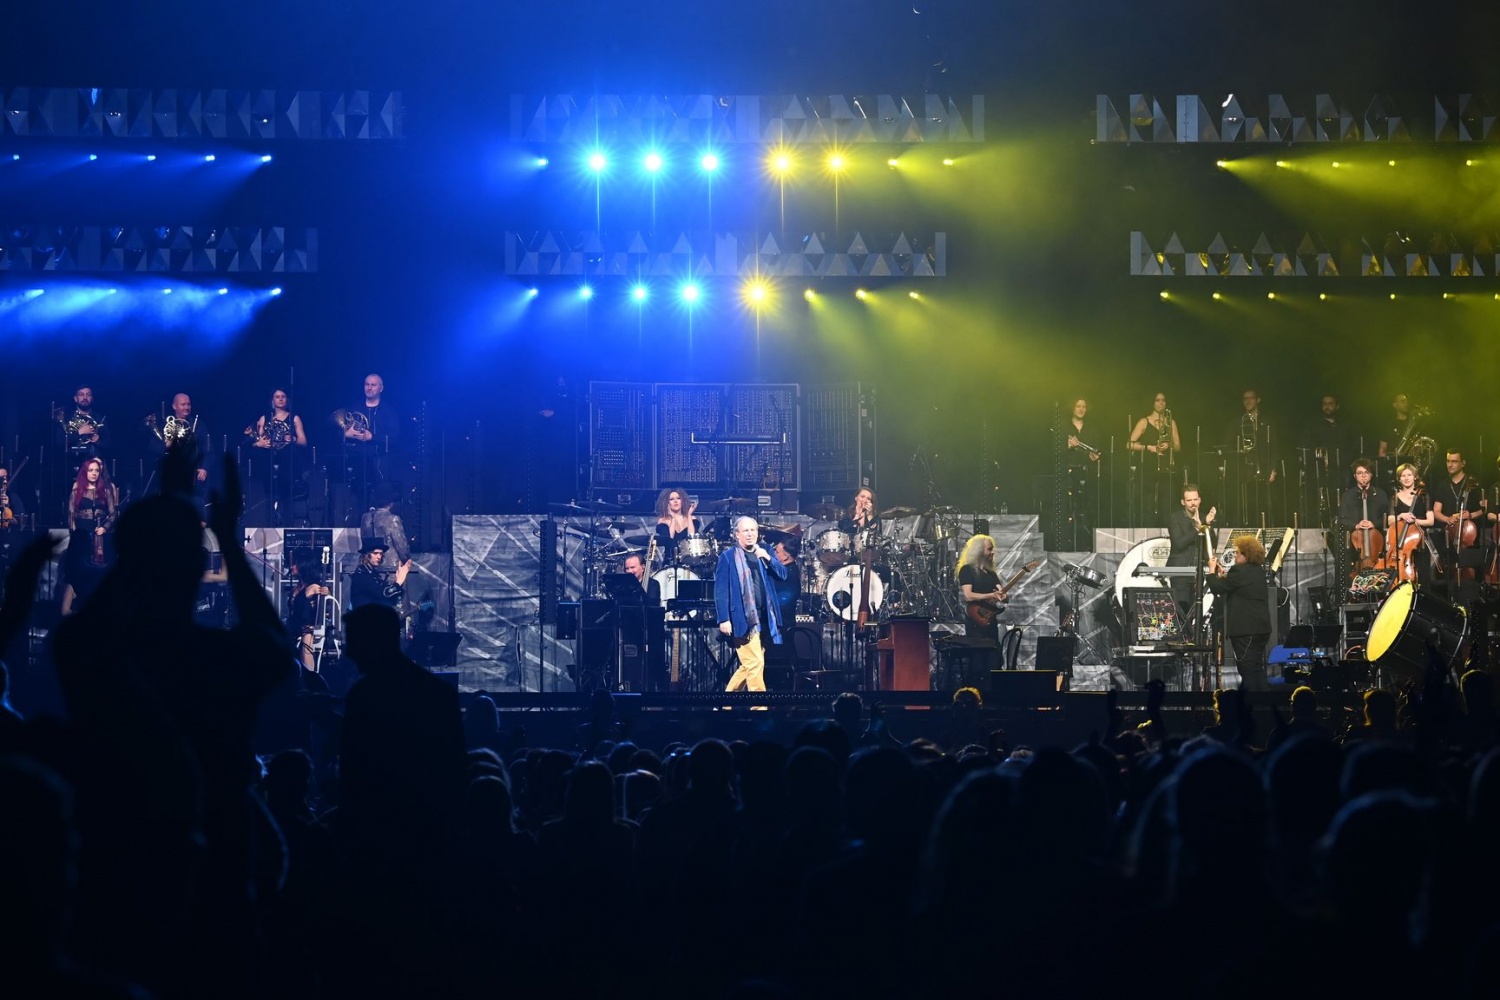 Hans Zimmer performs live with 10 members of Ukraine's Odessa Opera Orchestra at The O2 Arena on March 22, 2022 in London, England. (Photo by Dave J Hogan/Getty Images)